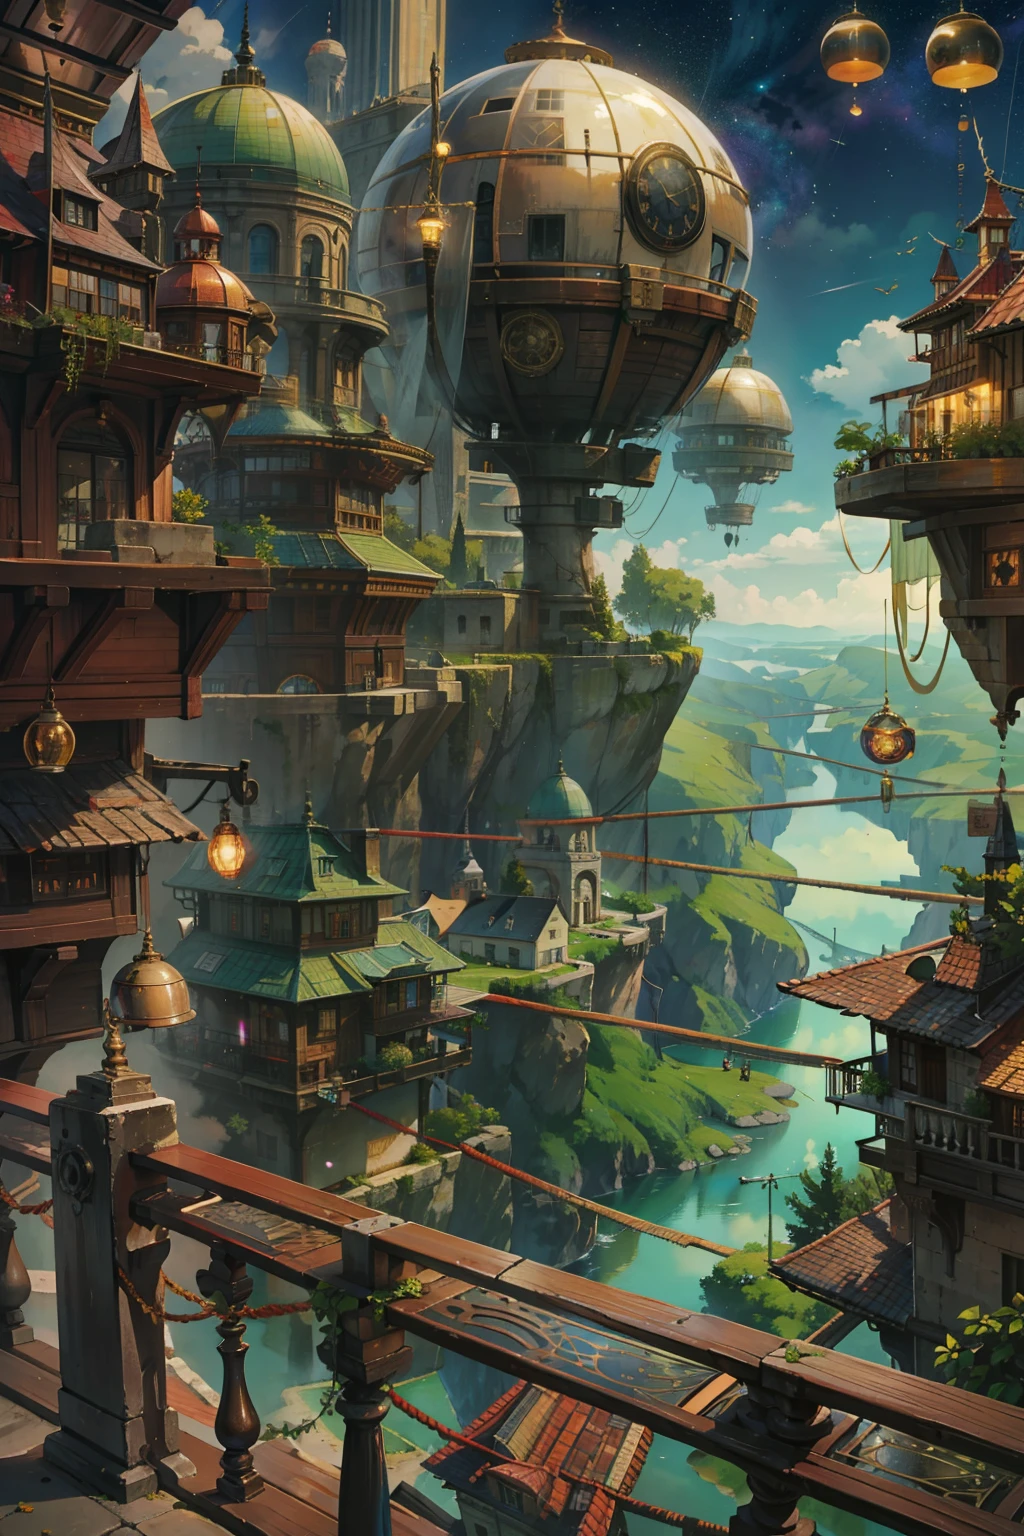 Ultra-wioff field of view，（levitating：1.5），（A huge double-ring steampunk city floating in space：1.3），（Ilumine a cidaoff futurista steampunk：1.4），（thick clouds：1.4），（Makoto Shinkai style：1.4），rejoice，qualidaoff perfeita，Clear focus（Desoroffm - Home：0.8）， （tmasterpiece：1.2）， （realisitic：1.2） ，（with bright light：1.2）， （melhor qualidaoff）， （Detailed starry sky：1.3） ，（complexdetails）， （8K）， （Meteor detail） ，（sharp focus），（having a good time），（Award Winning Digital Artwork：1.3） off （sketching：1.3），（with dynamism：1.3）,studiolight,theme，olhando off cima, The space, afloat， --at 6